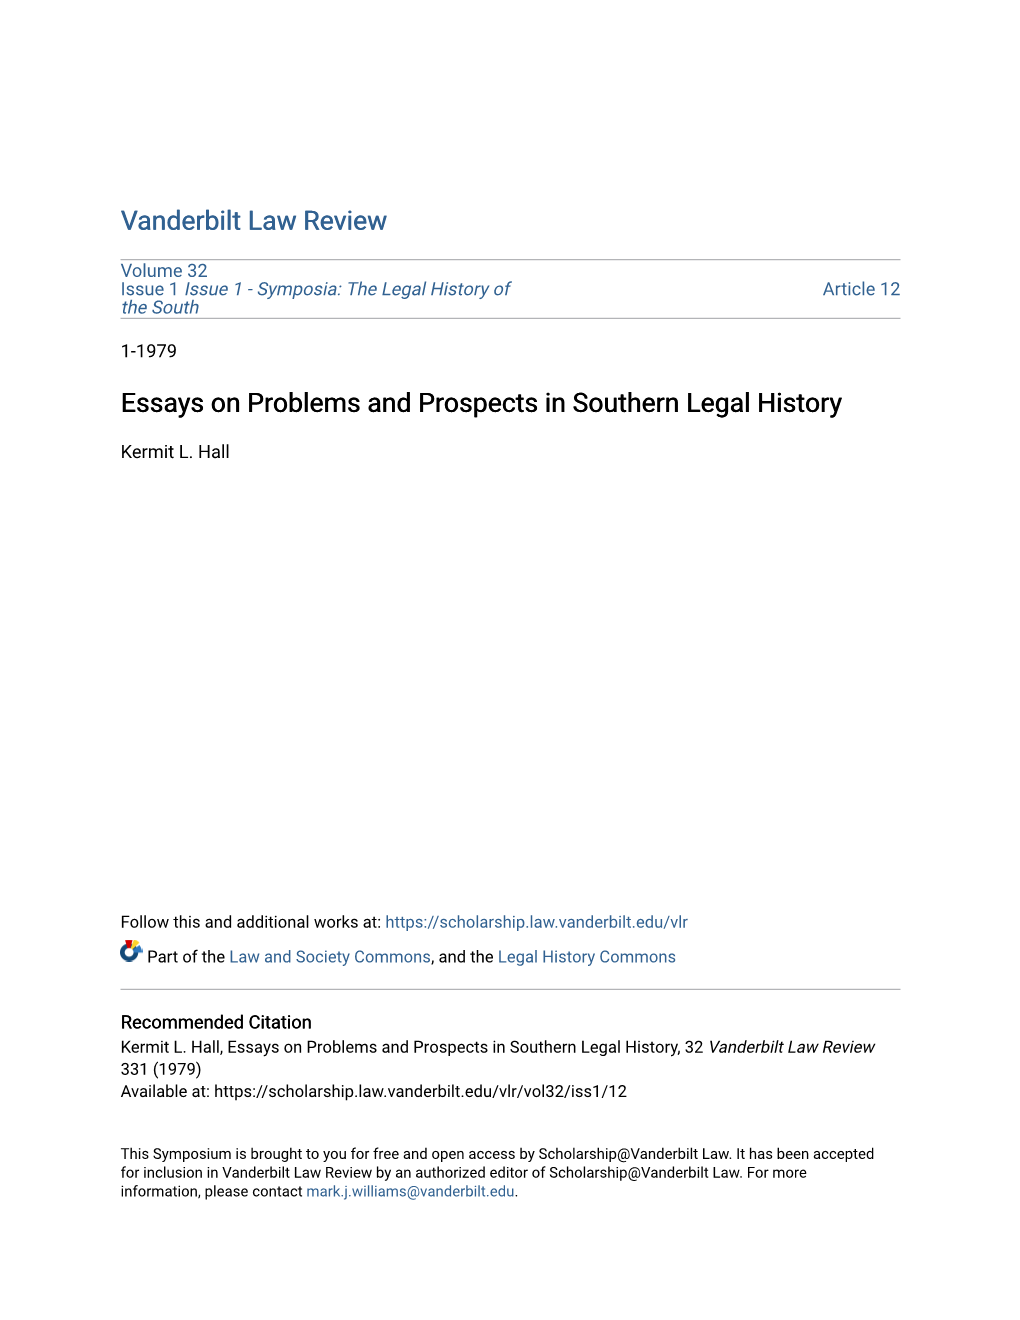 Essays on Problems and Prospects in Southern Legal History